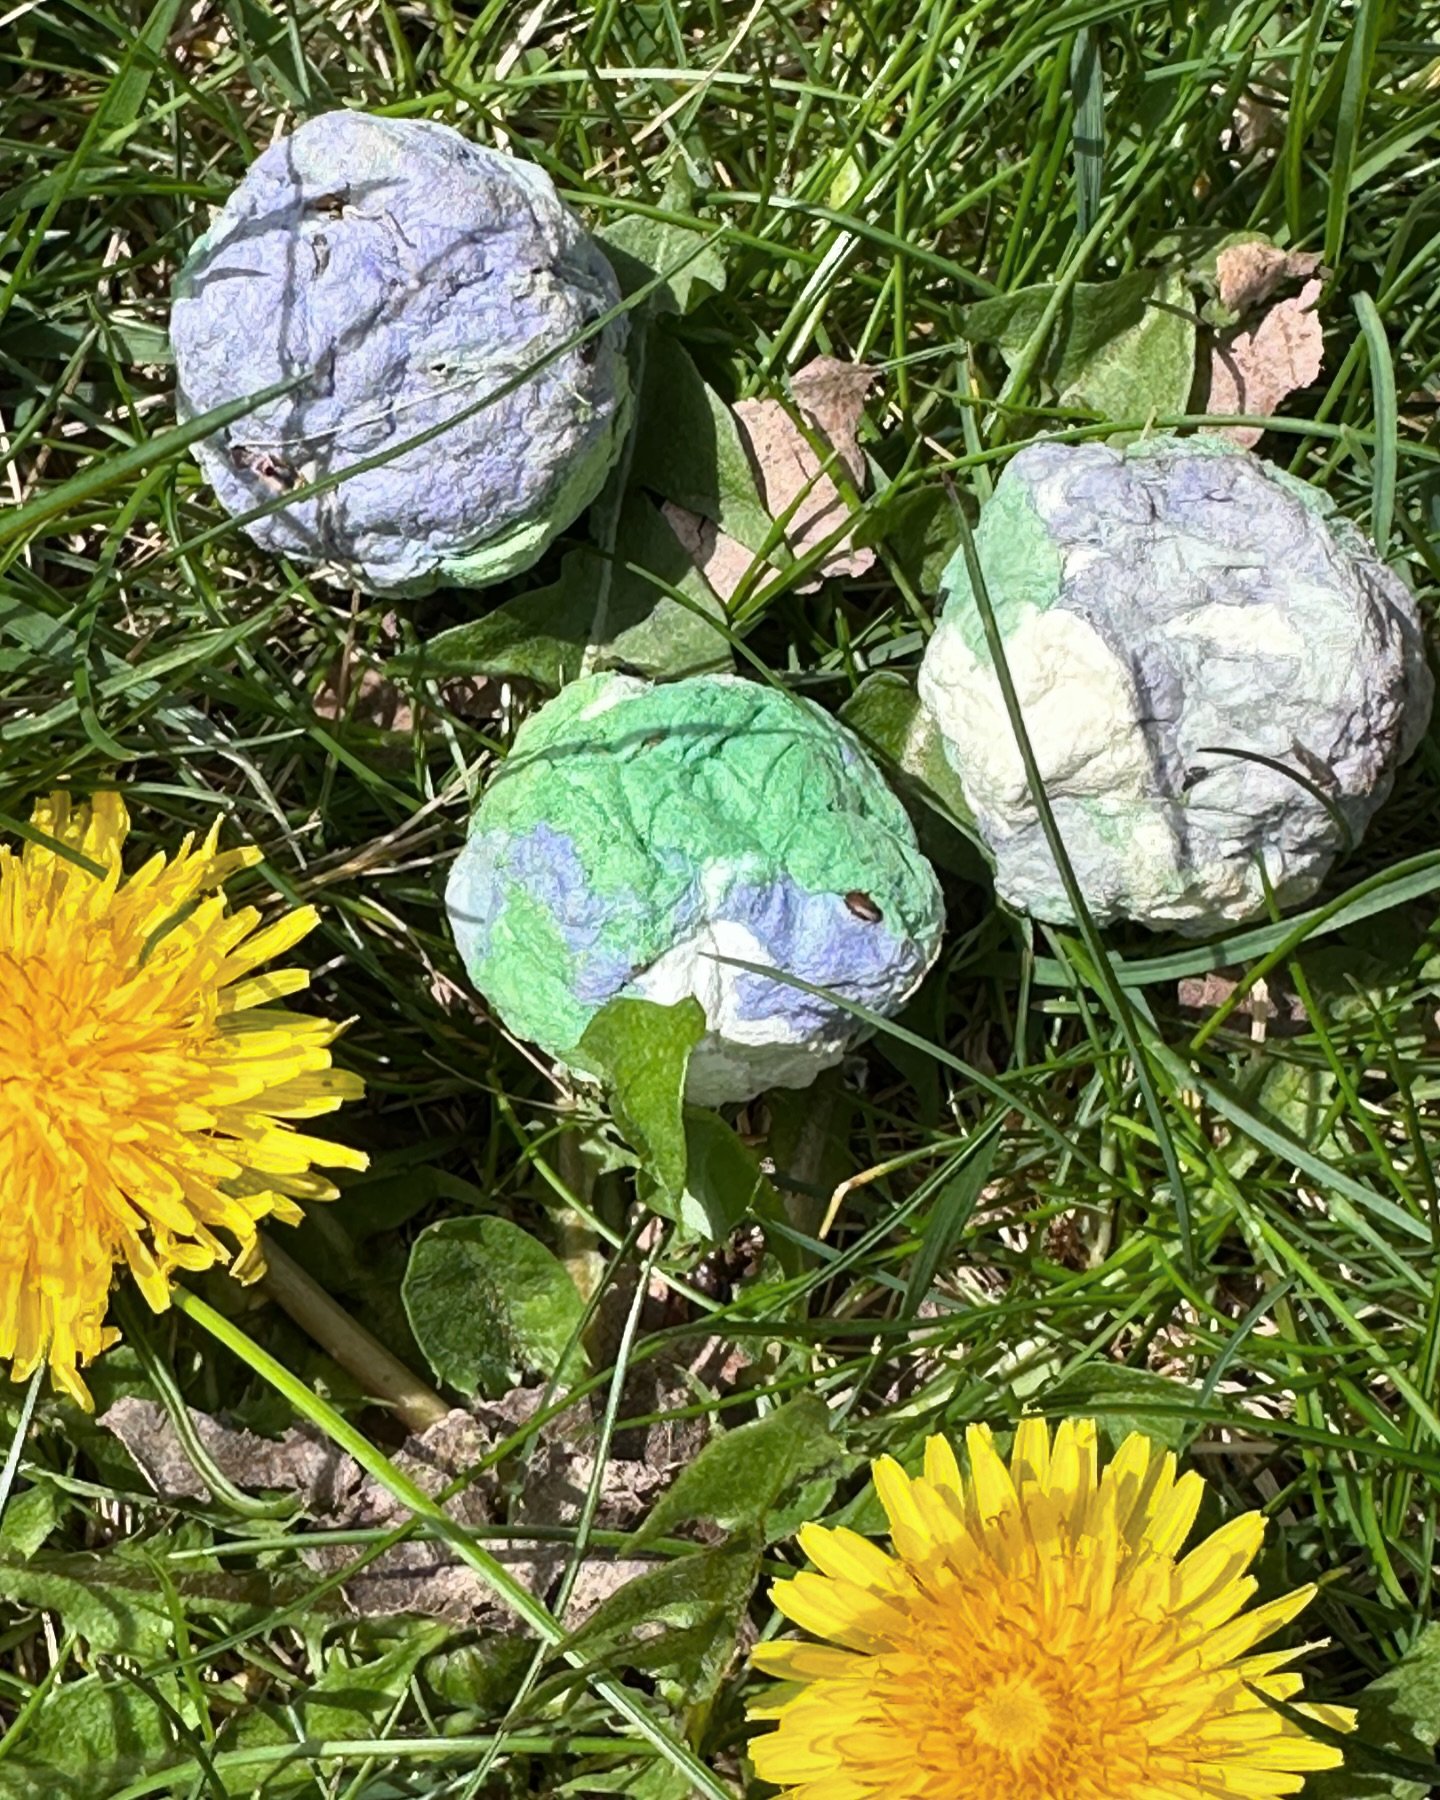 🌎Happy Earth Day! Make these festive Earth Day seed bombs to celebrate our planet and share the love with friends and family. Learn how on our blog: https://naturinginmadison.com/naturing-blog-archive/seed-bombs

🌎Don't forget about our Spring Sign